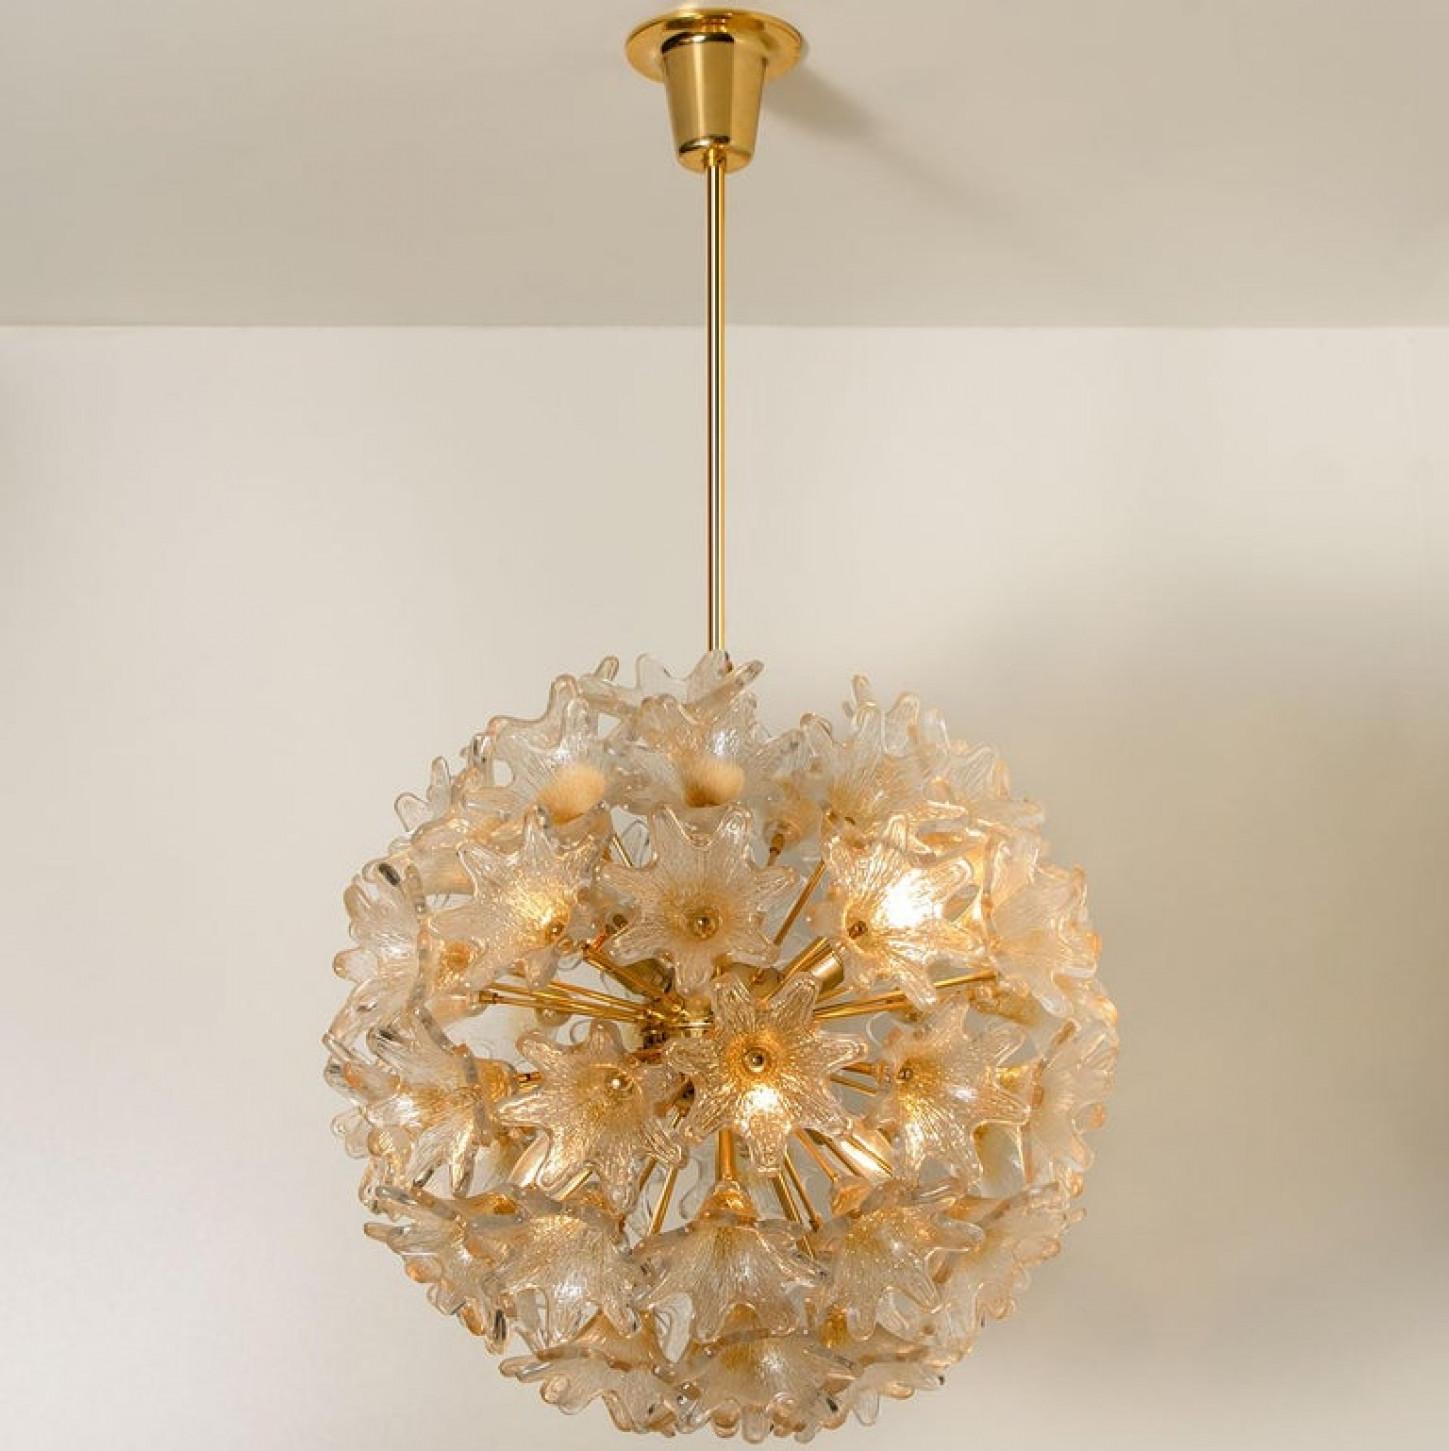 Pair of Brass Gold Murano Glass Sputnik Light Fixtures by Paolo Venini for VeArt For Sale 5